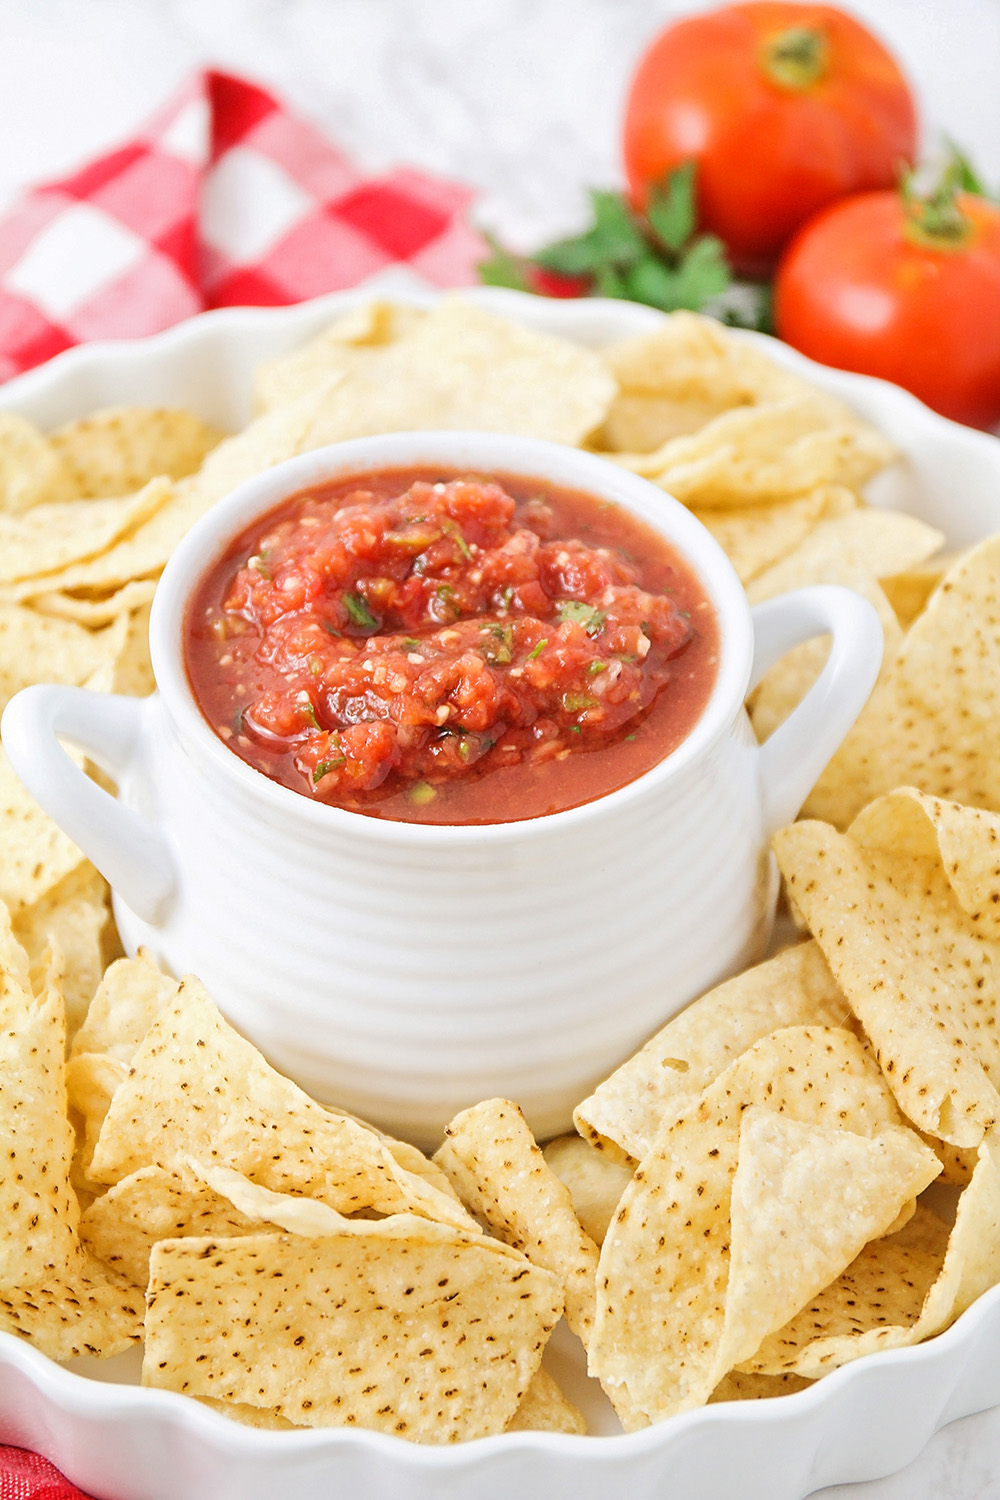 This delicious and flavorful salsa is made with fresh tomatoes and peppers. It's the perfect way to use up those garden tomatoes!